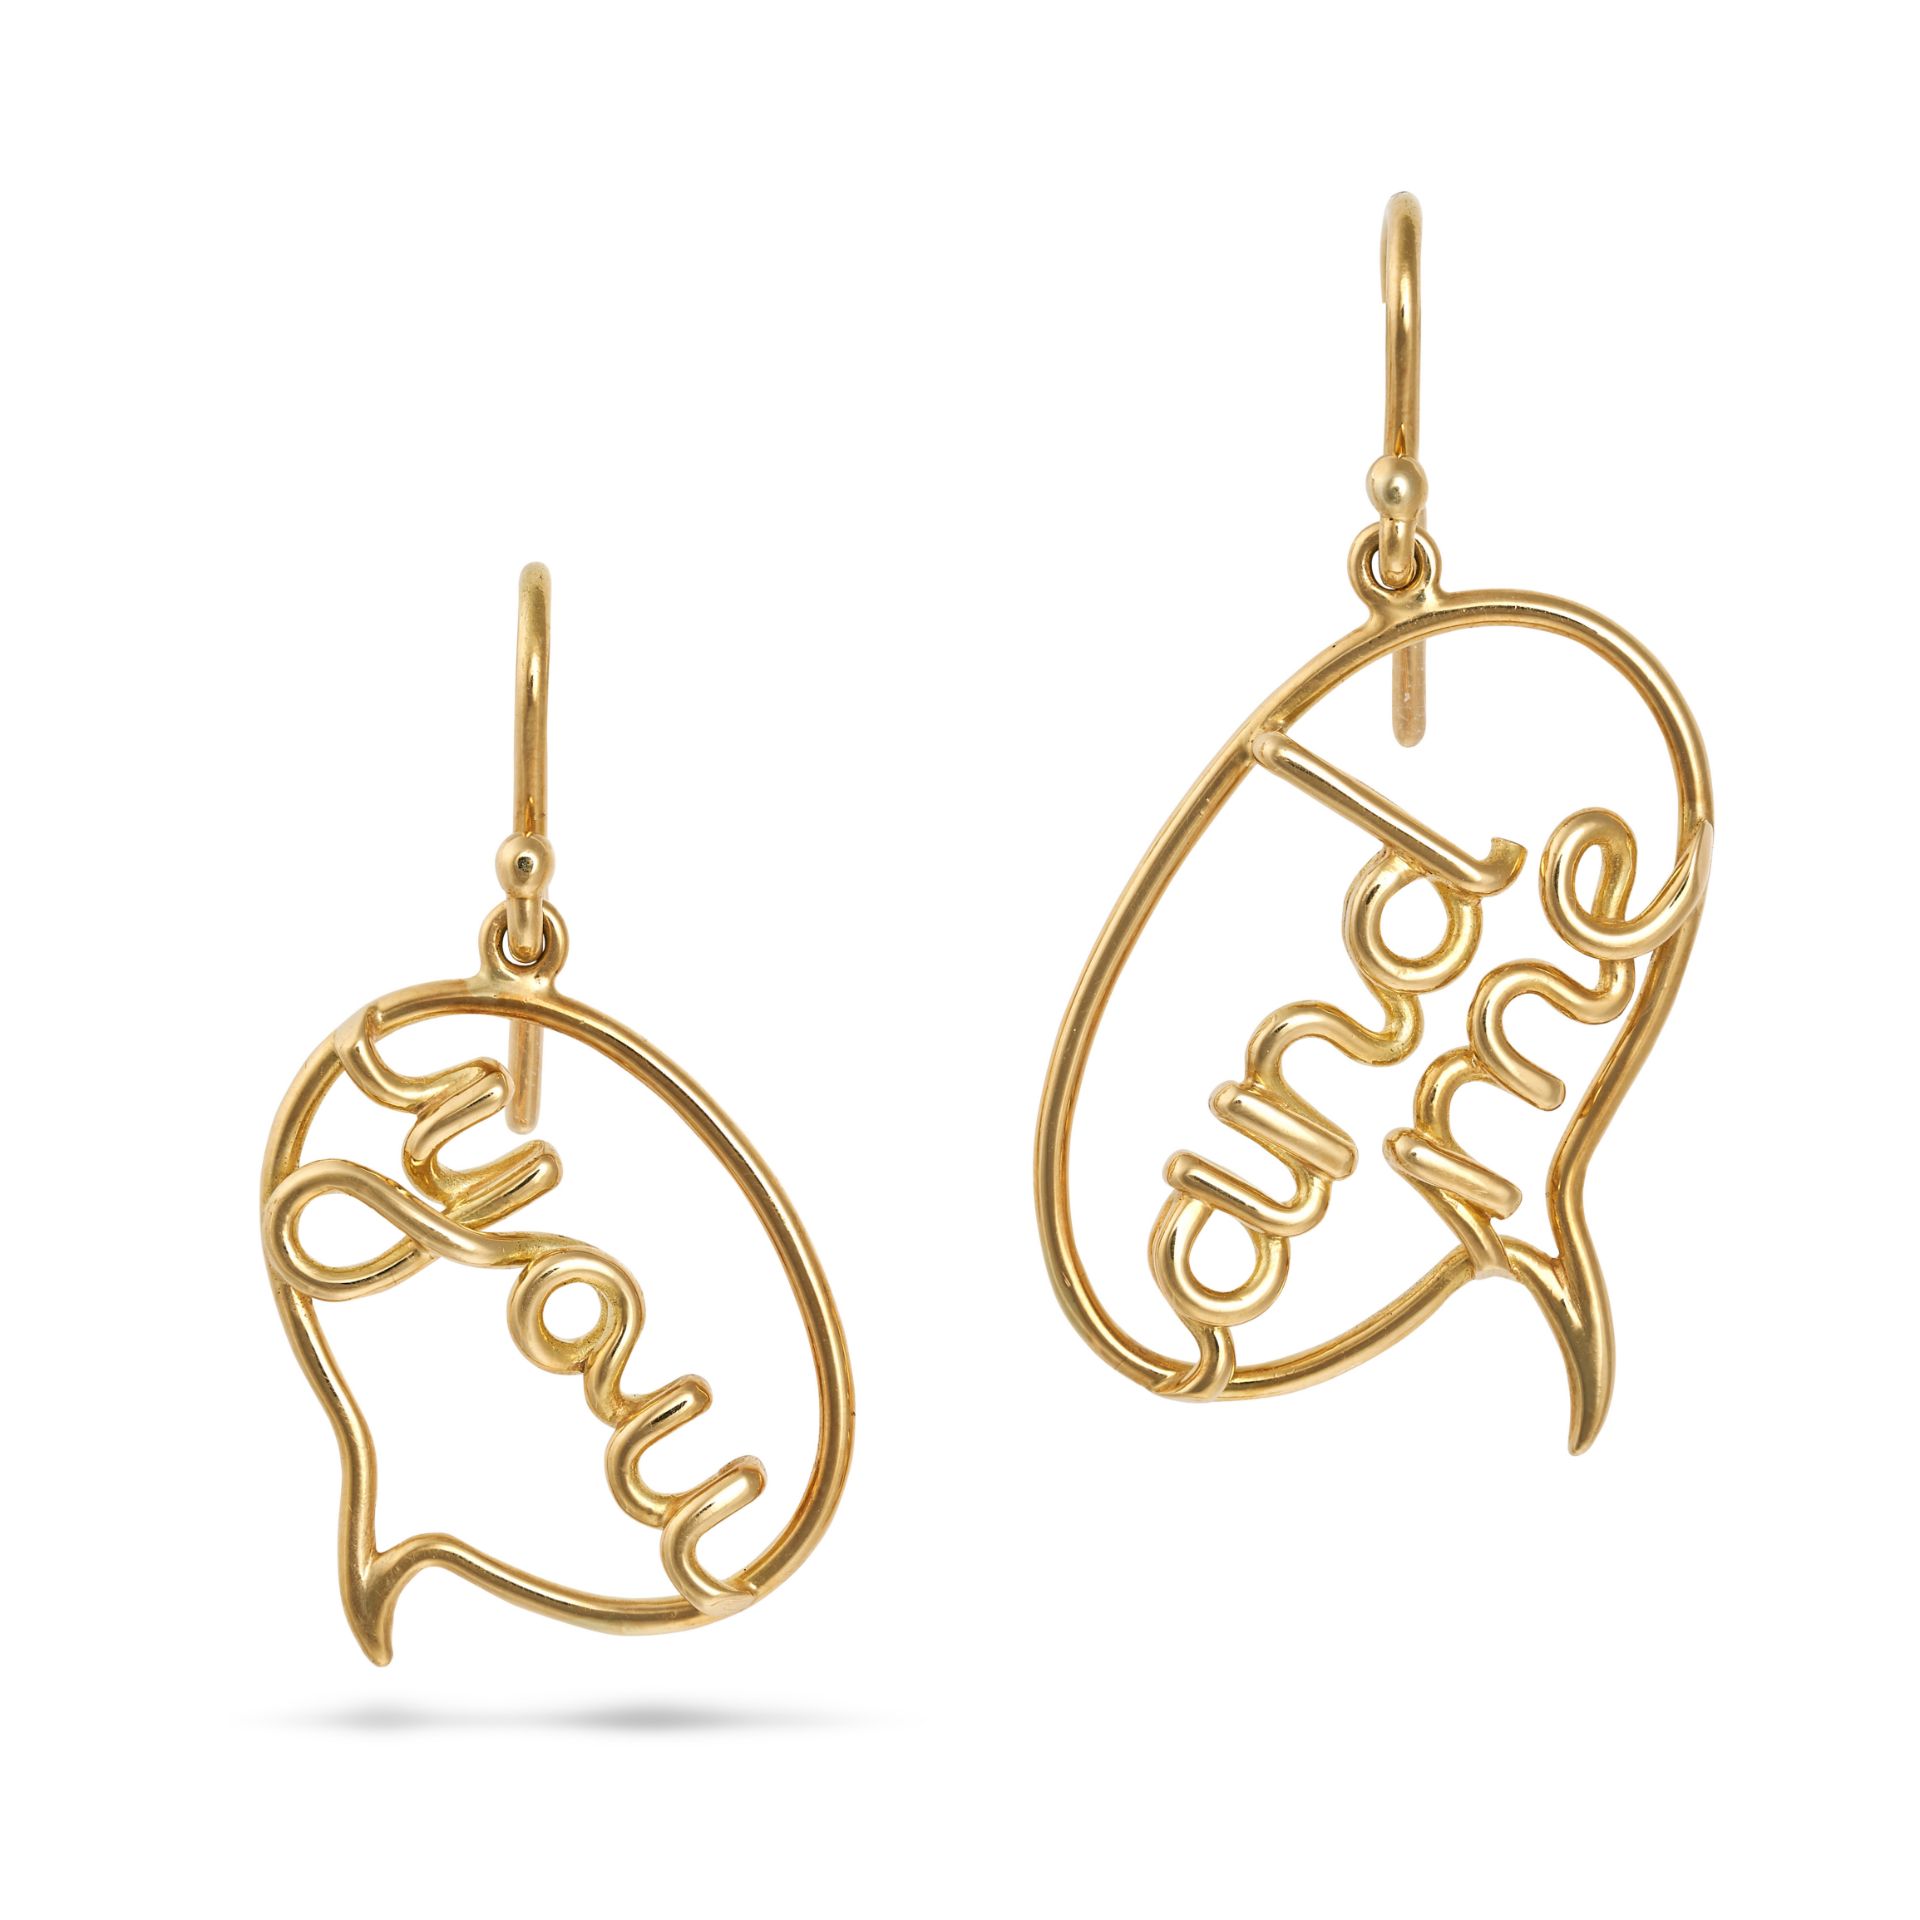 SOLANGE AZAGURY-PARTRIDGE, A PAIR OF YOU AND ME EARRINGS in 18ct yellow gold, each suspending a s...